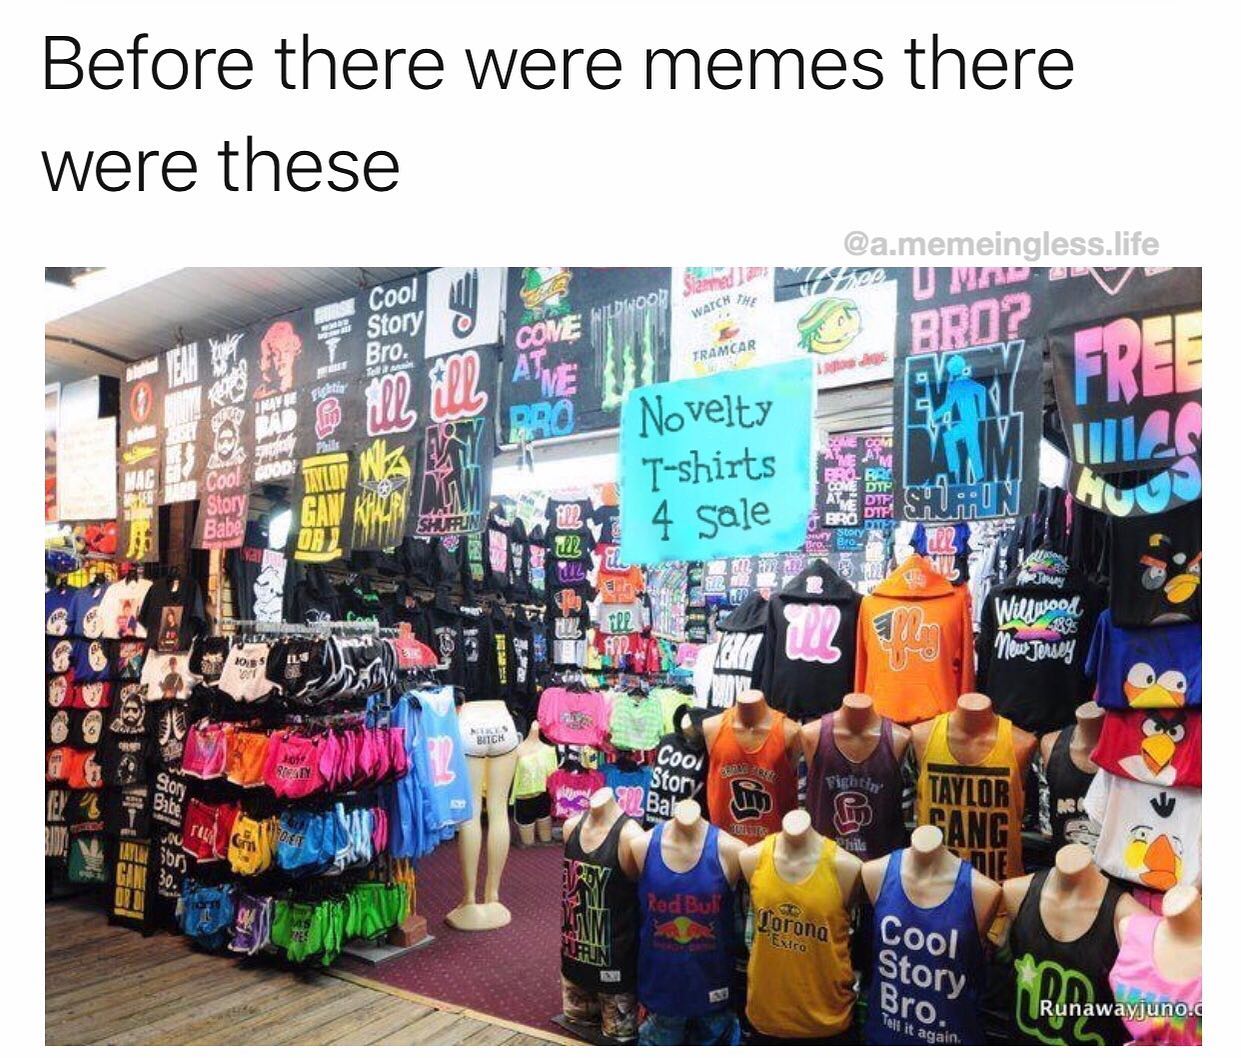 meme - retail - Before there were memes there were these .memeingless.life Wildwoor Watch The A Bro? Tramcar Novelty Tshirts Rhe Ju 1901In no 4 sale His Willisood News Jersey Lez Rich Cool Obres Sa Story Uits Cancer Red Bull Corona Exro Cool Story Runaway